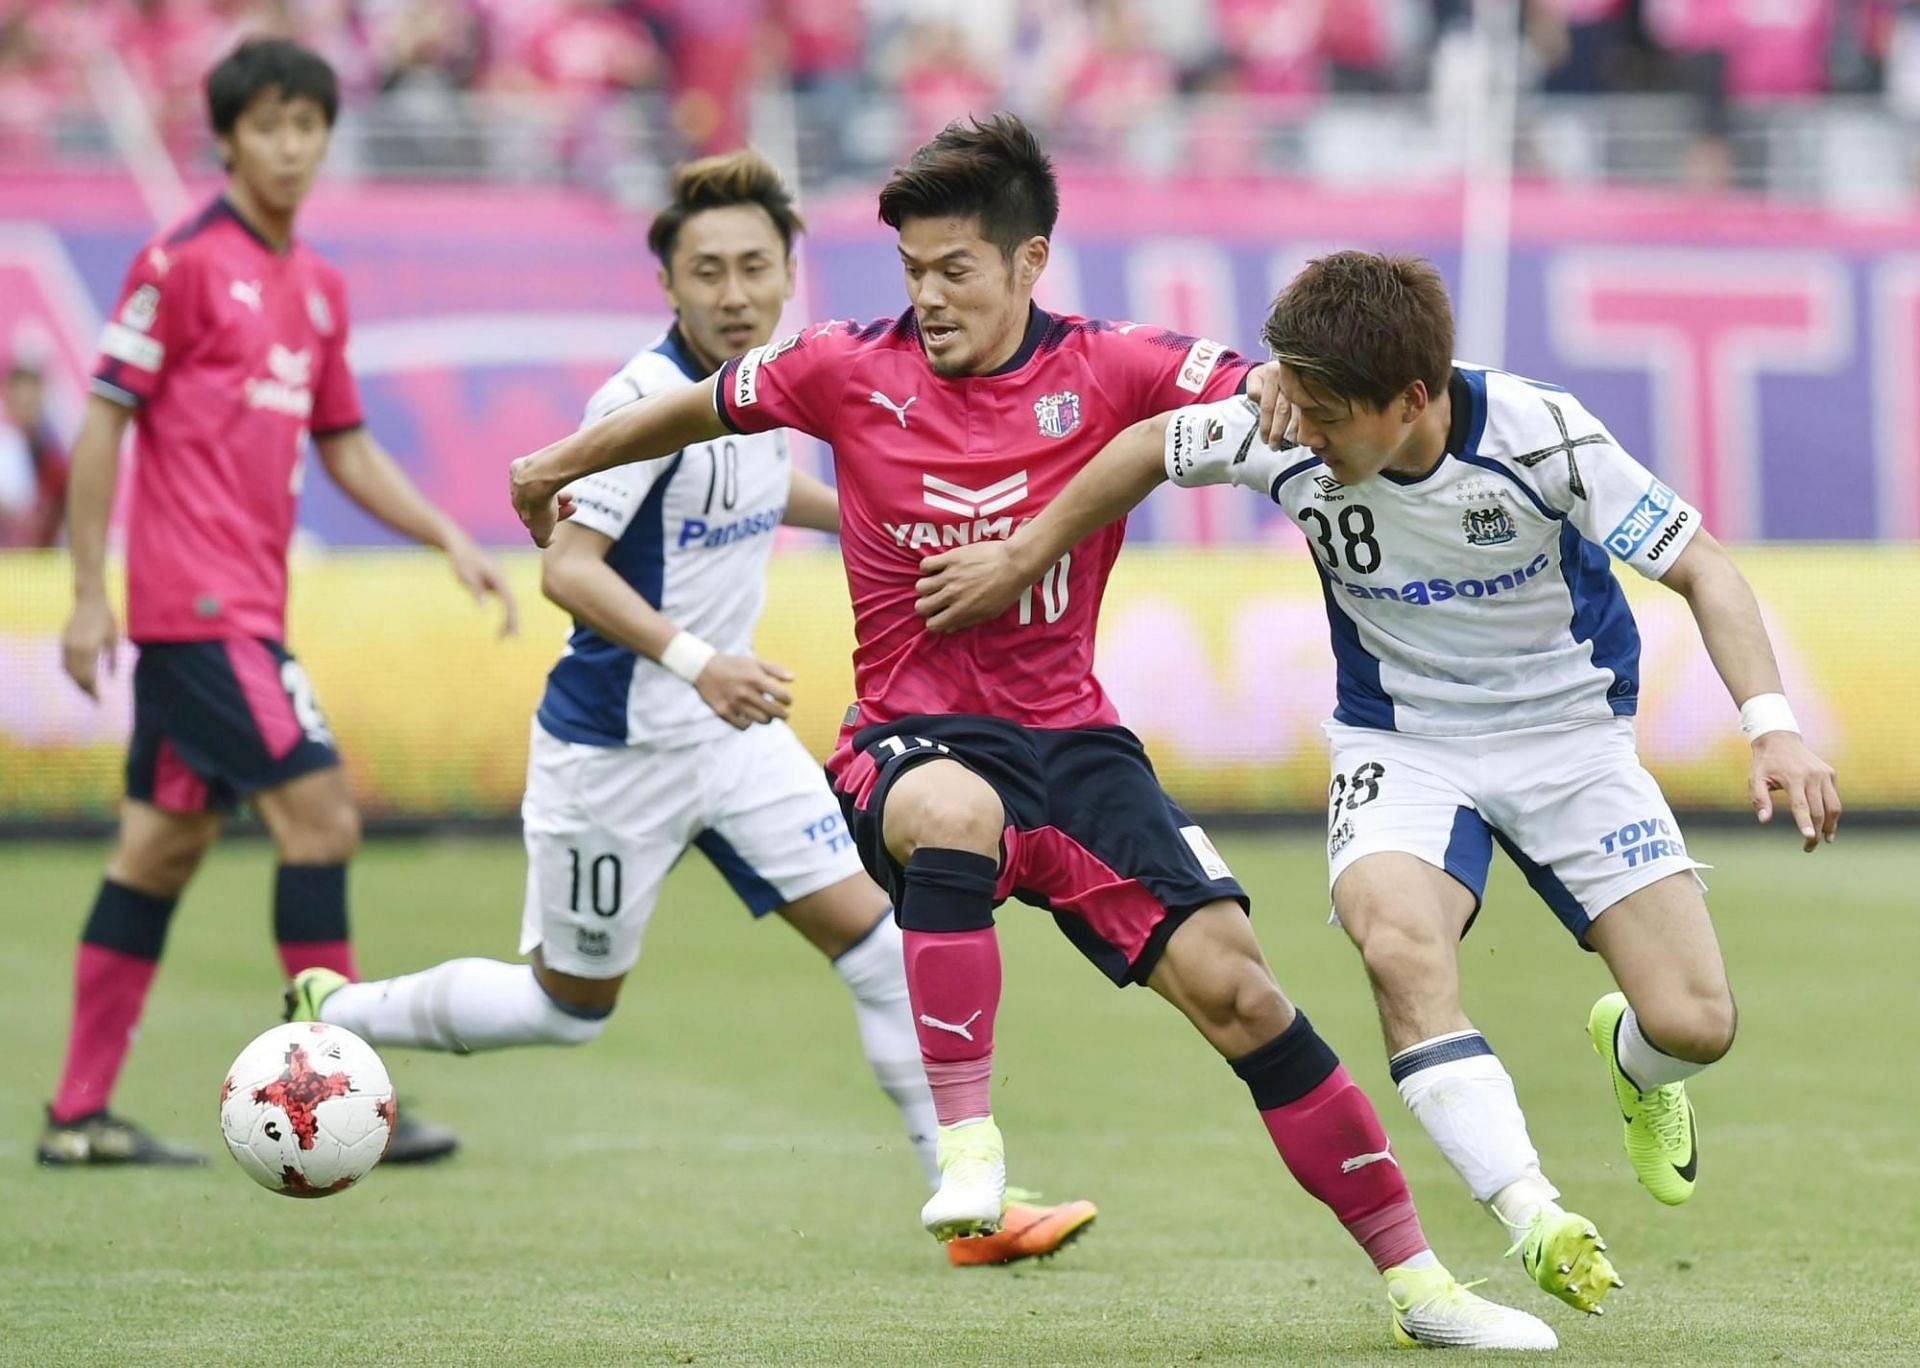 Cerezo Osaka and Gamba Osaka go head-to-head in their J League Cup fixture on Saturday